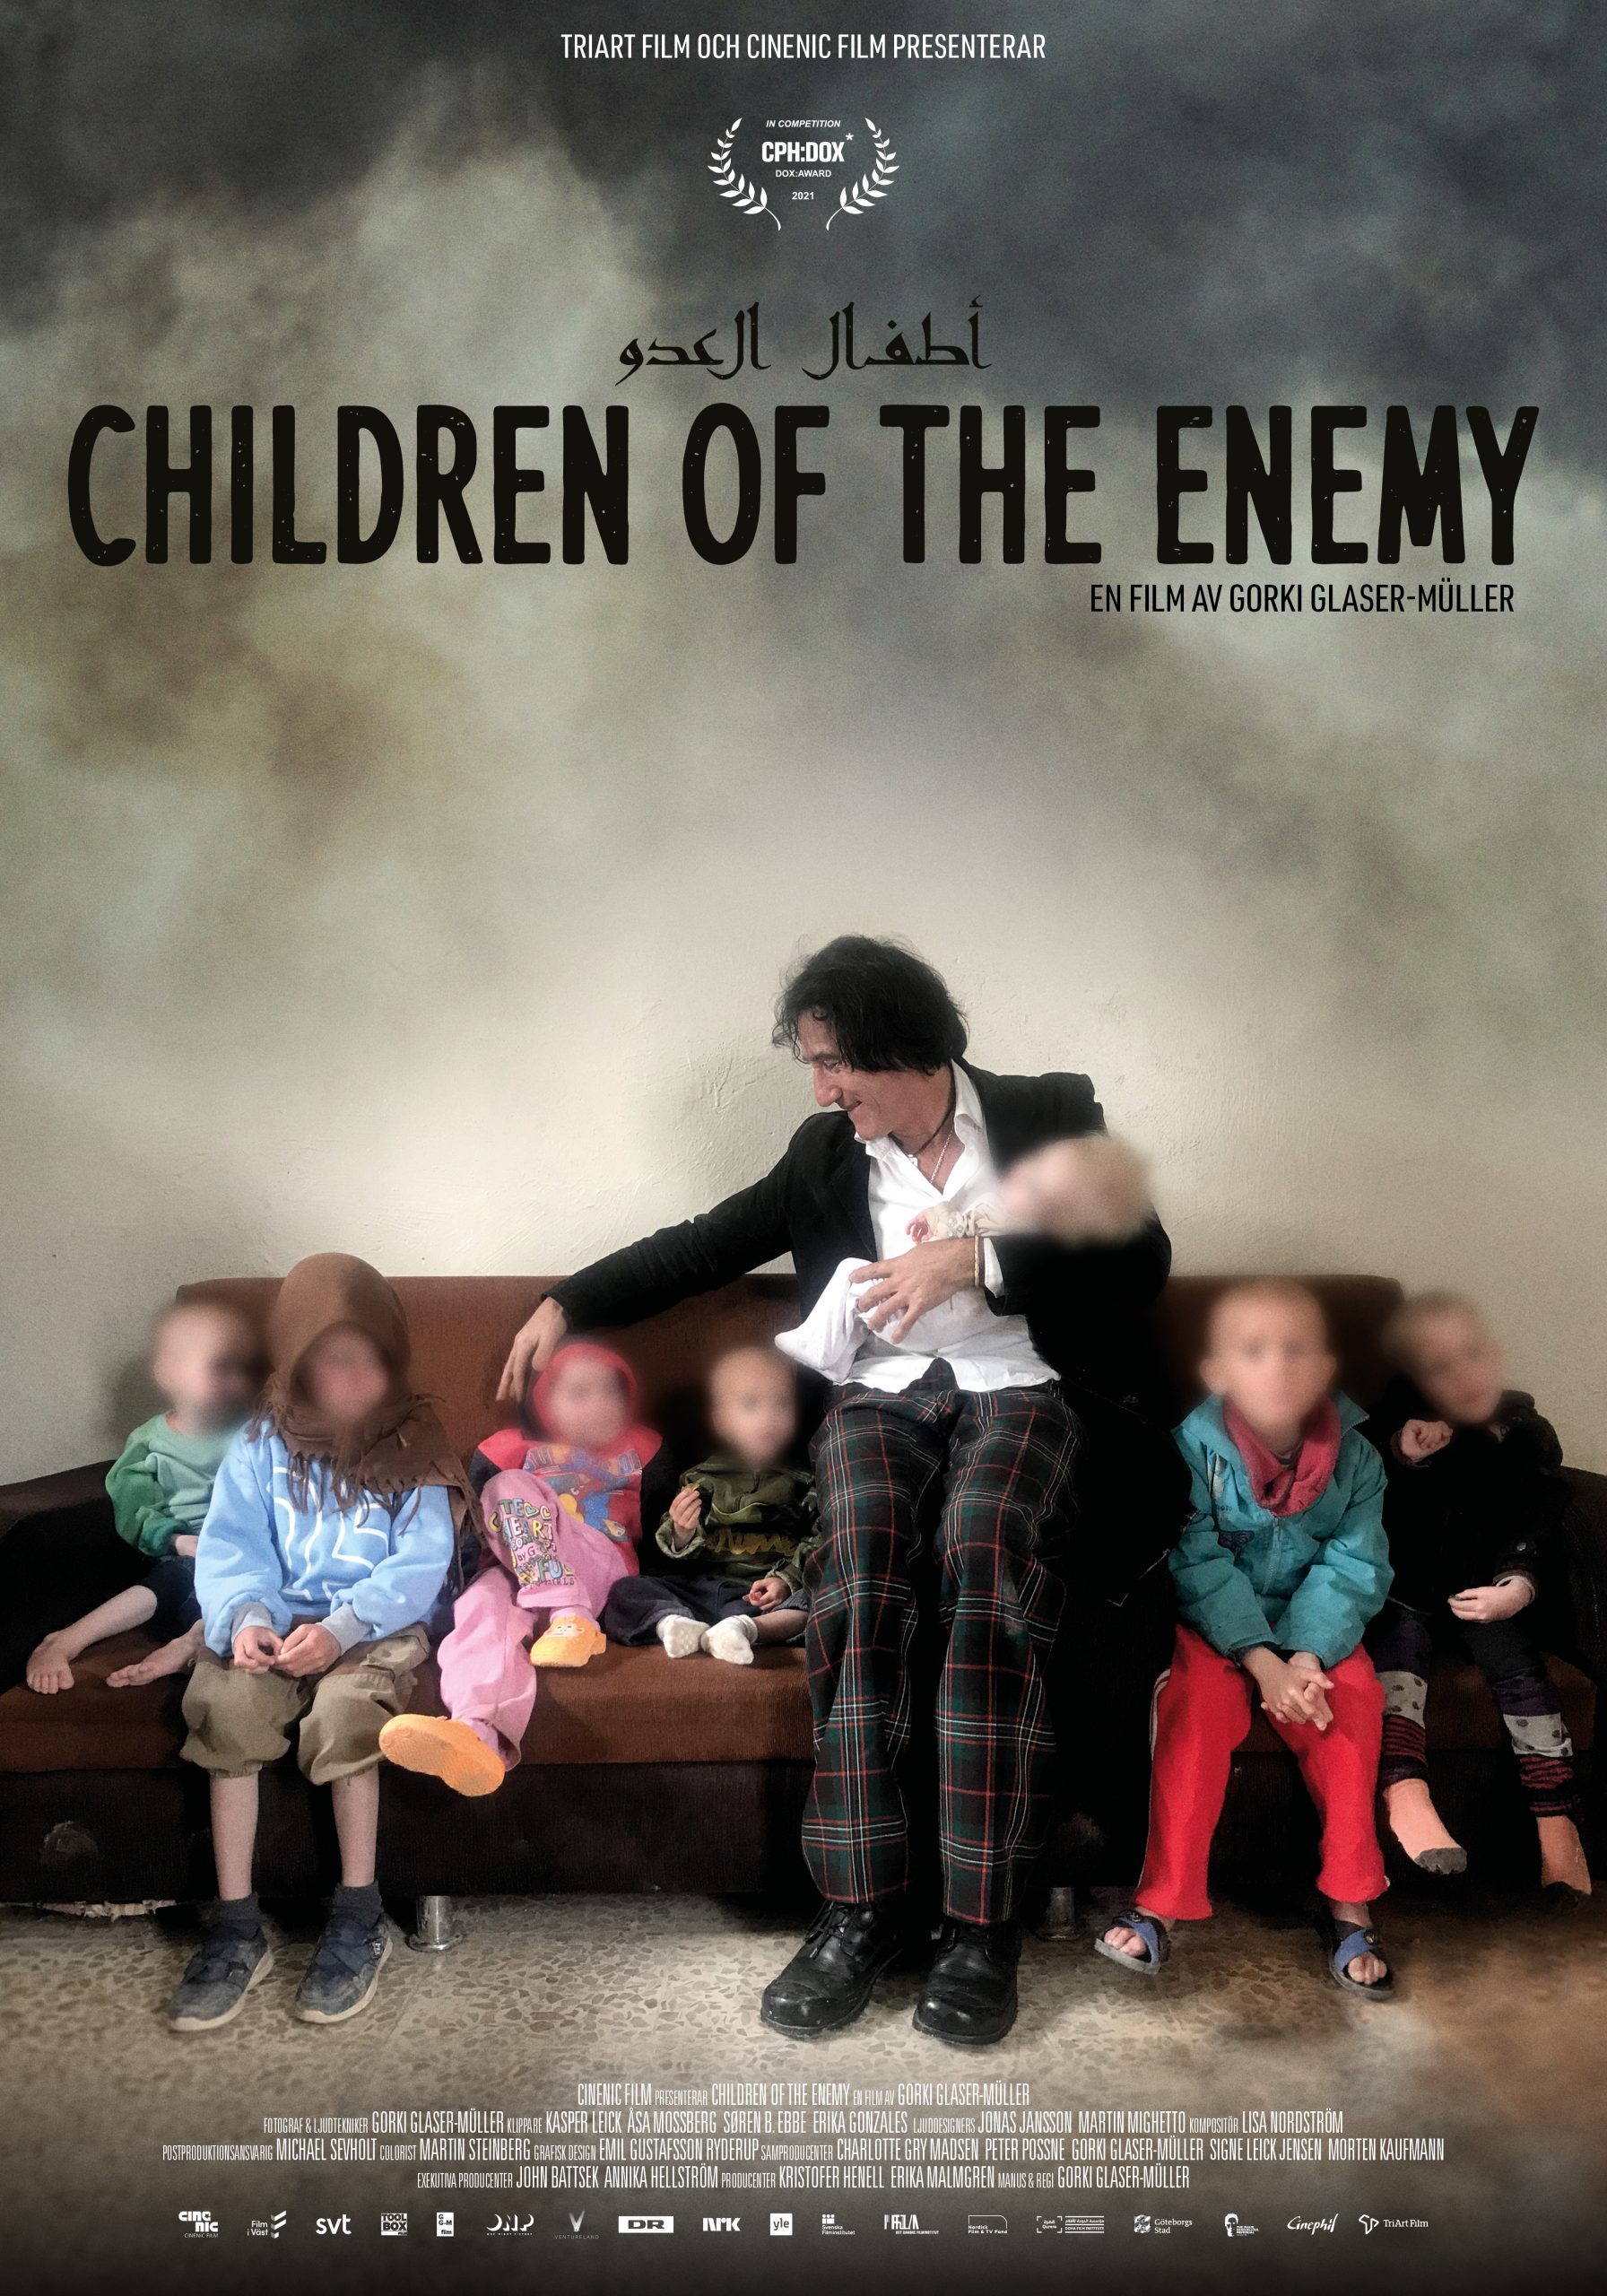 CHILDREN OF THE ENEMY